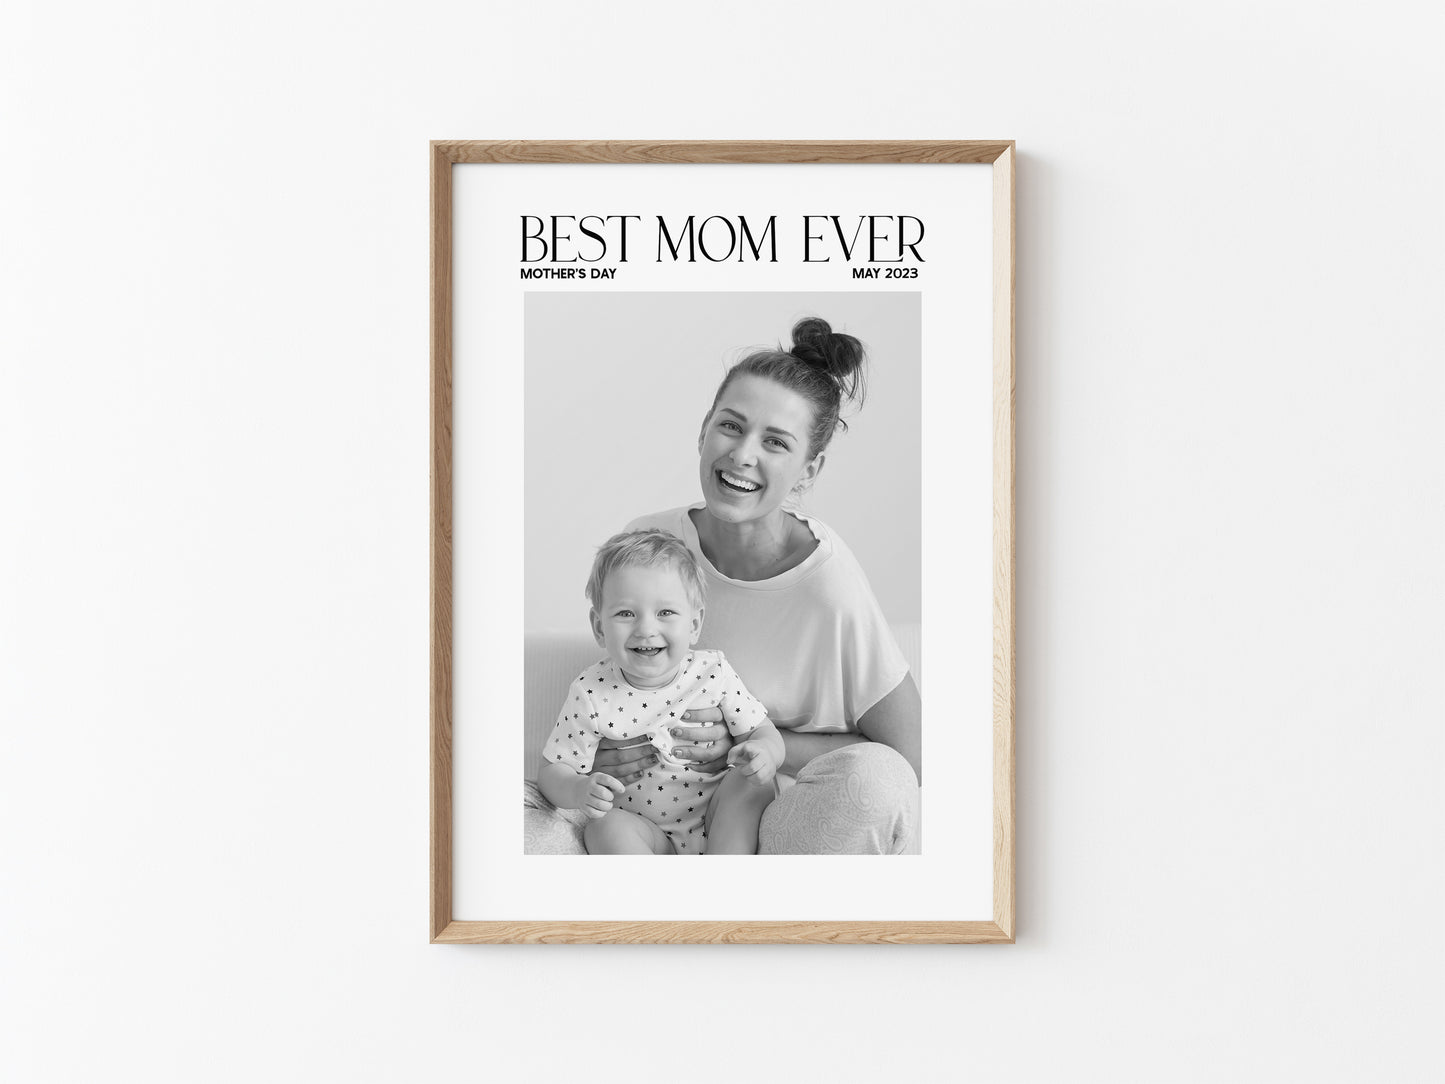 Best Mom Ever 5x7 Photo Mat with Envelope